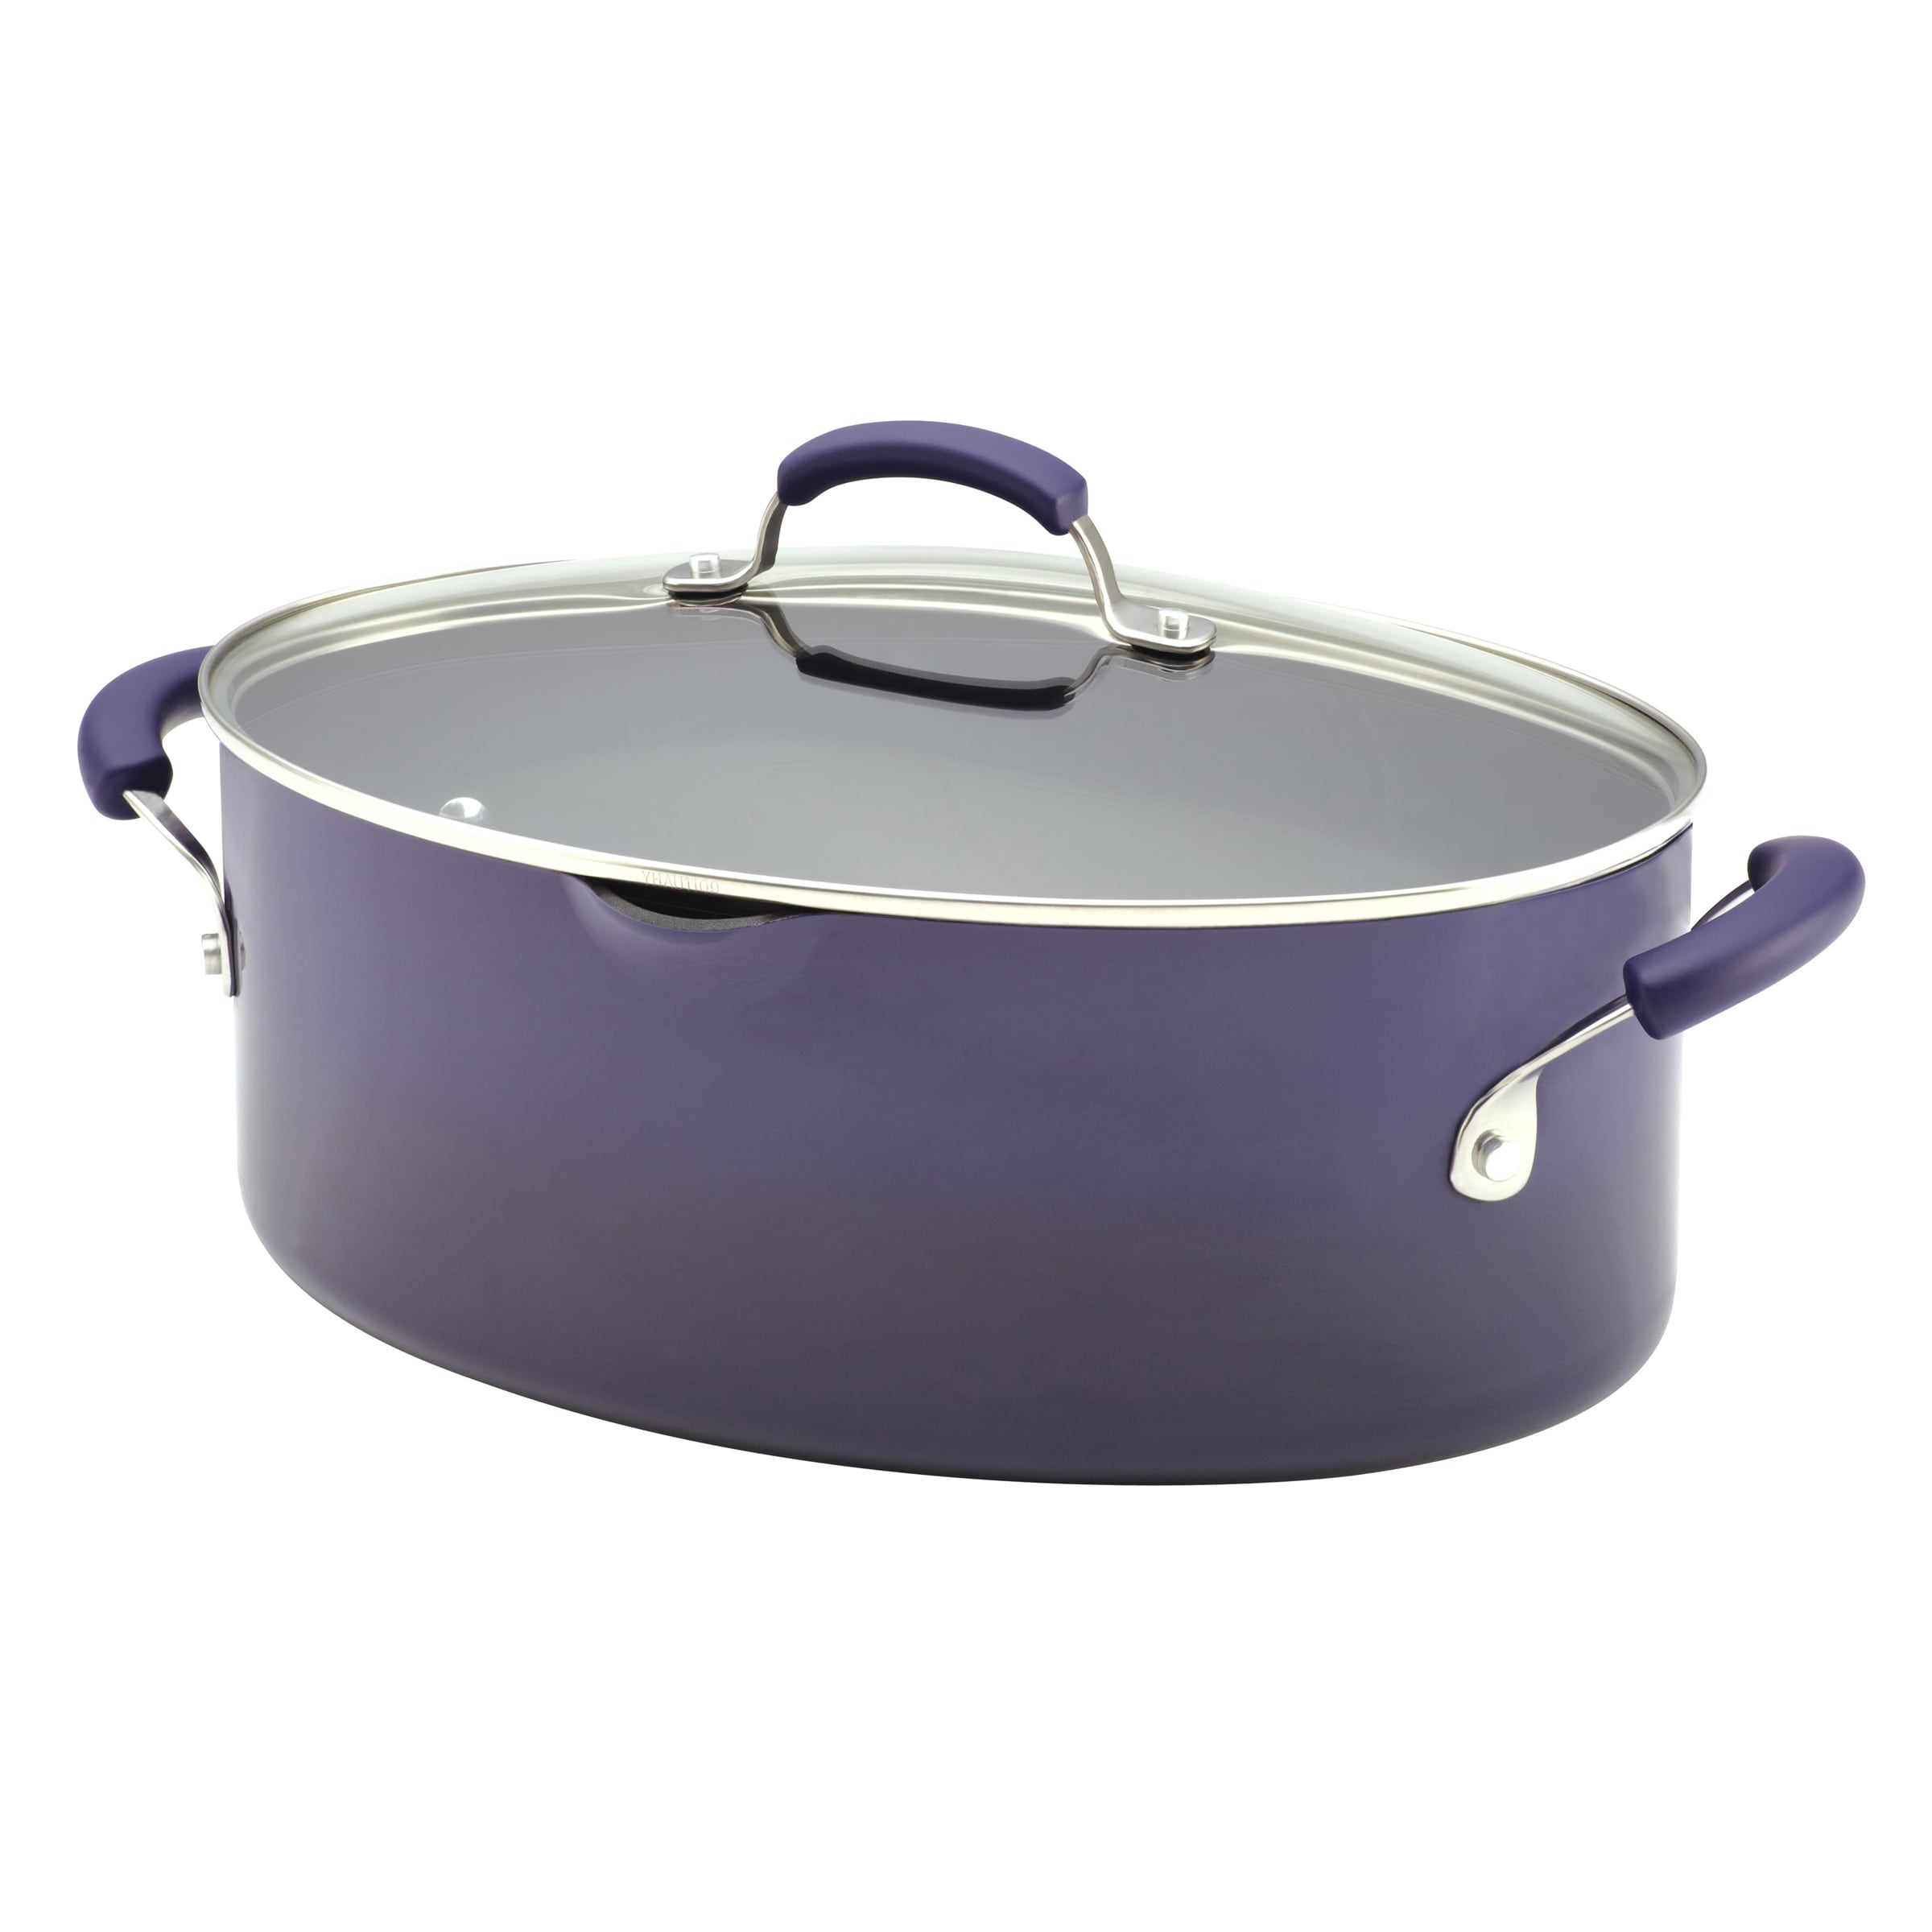 Rachael Ray Hard Anodized Dishwasher Safe 8qt. Covered Oval Pasta Pot 